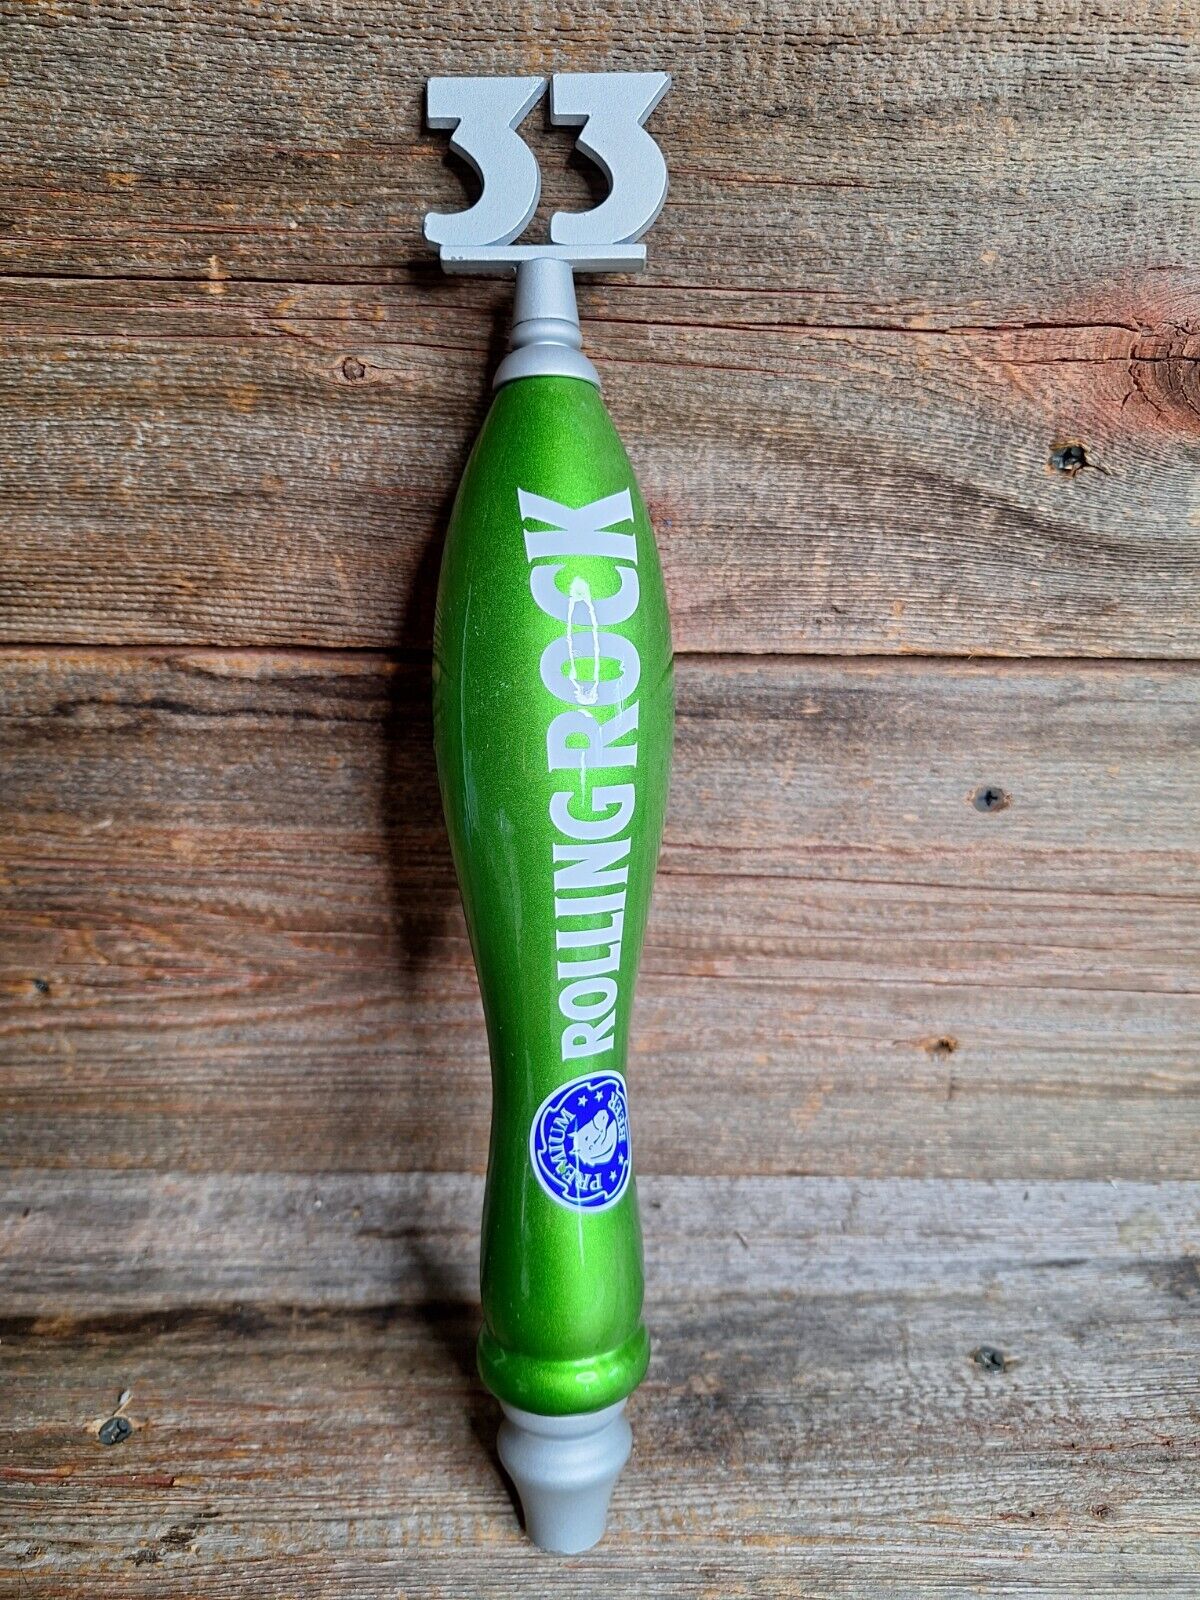 Rolling Rock “33” Latrobe PA Pub Style Logo Beer Tap Handle 13” Tall - Nice Used